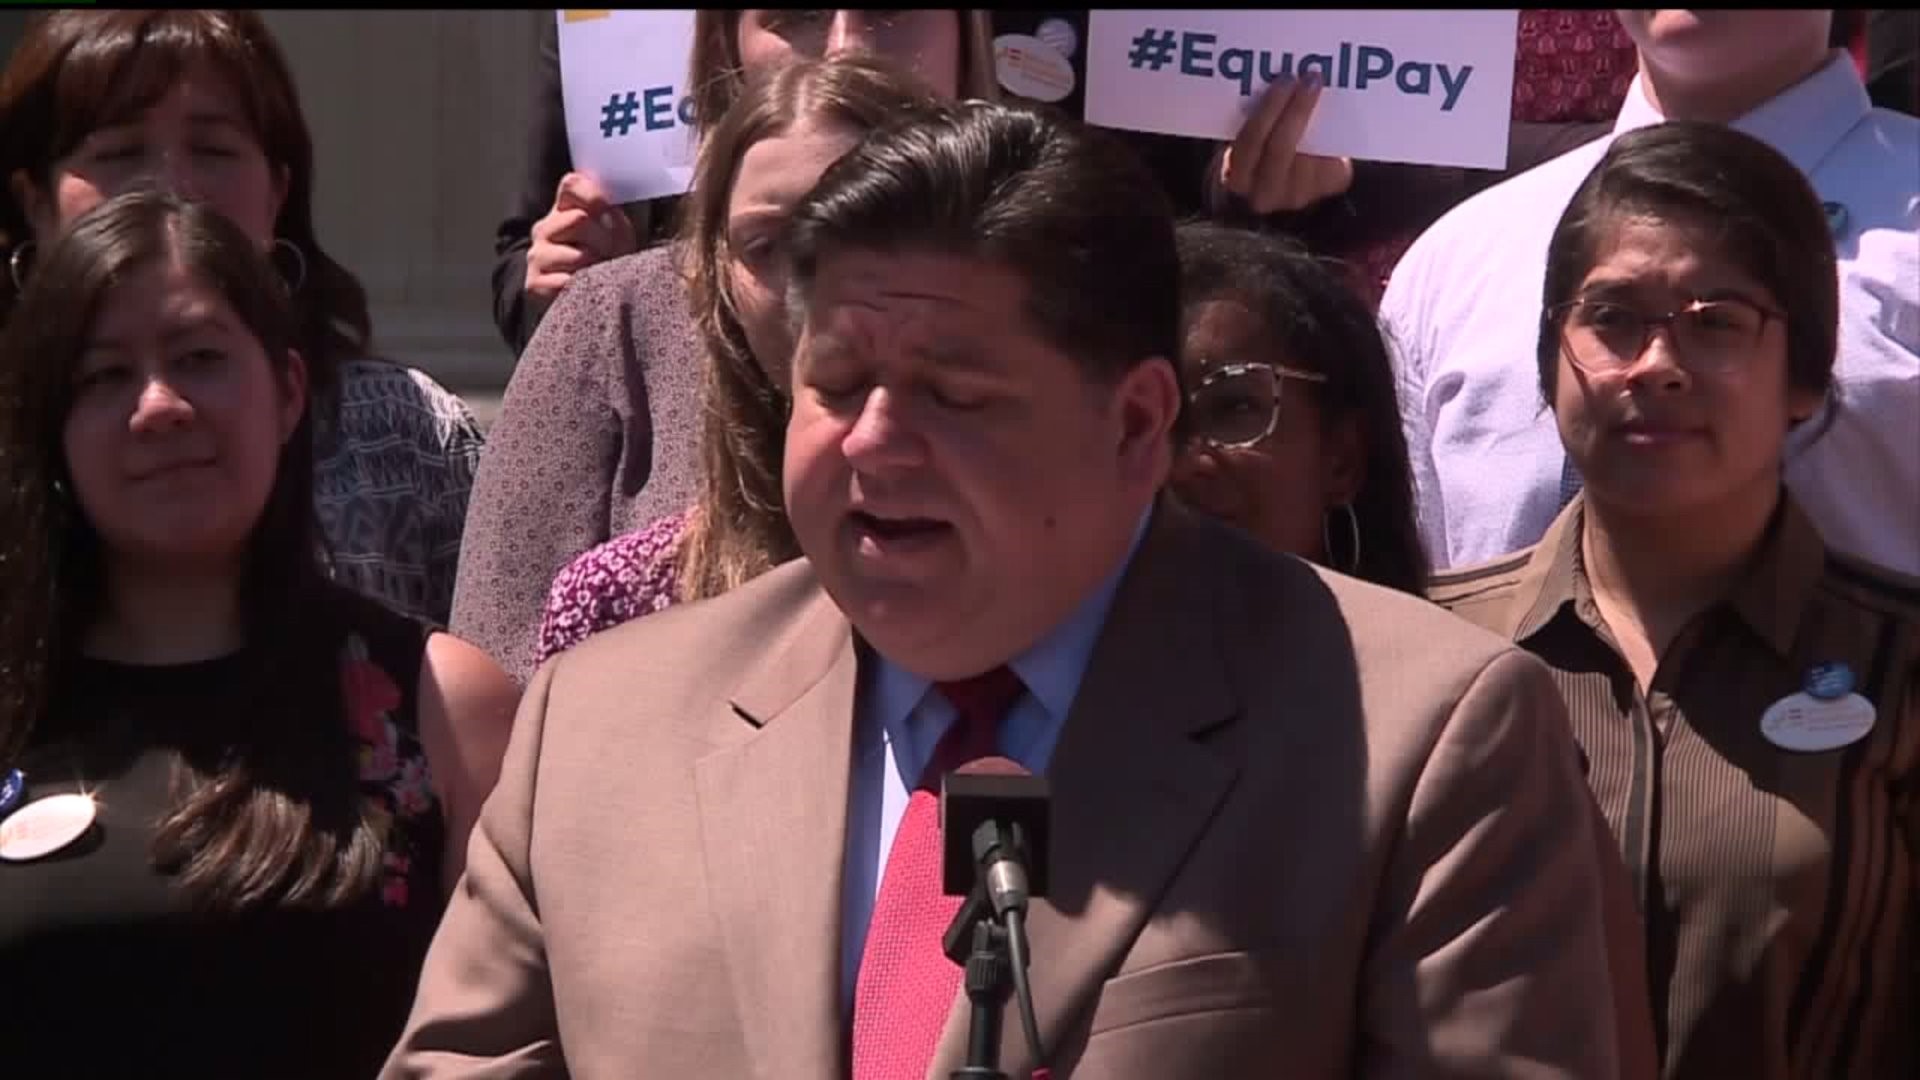 Illinois Governor J.B. Pritzker has been spending his own money on the state